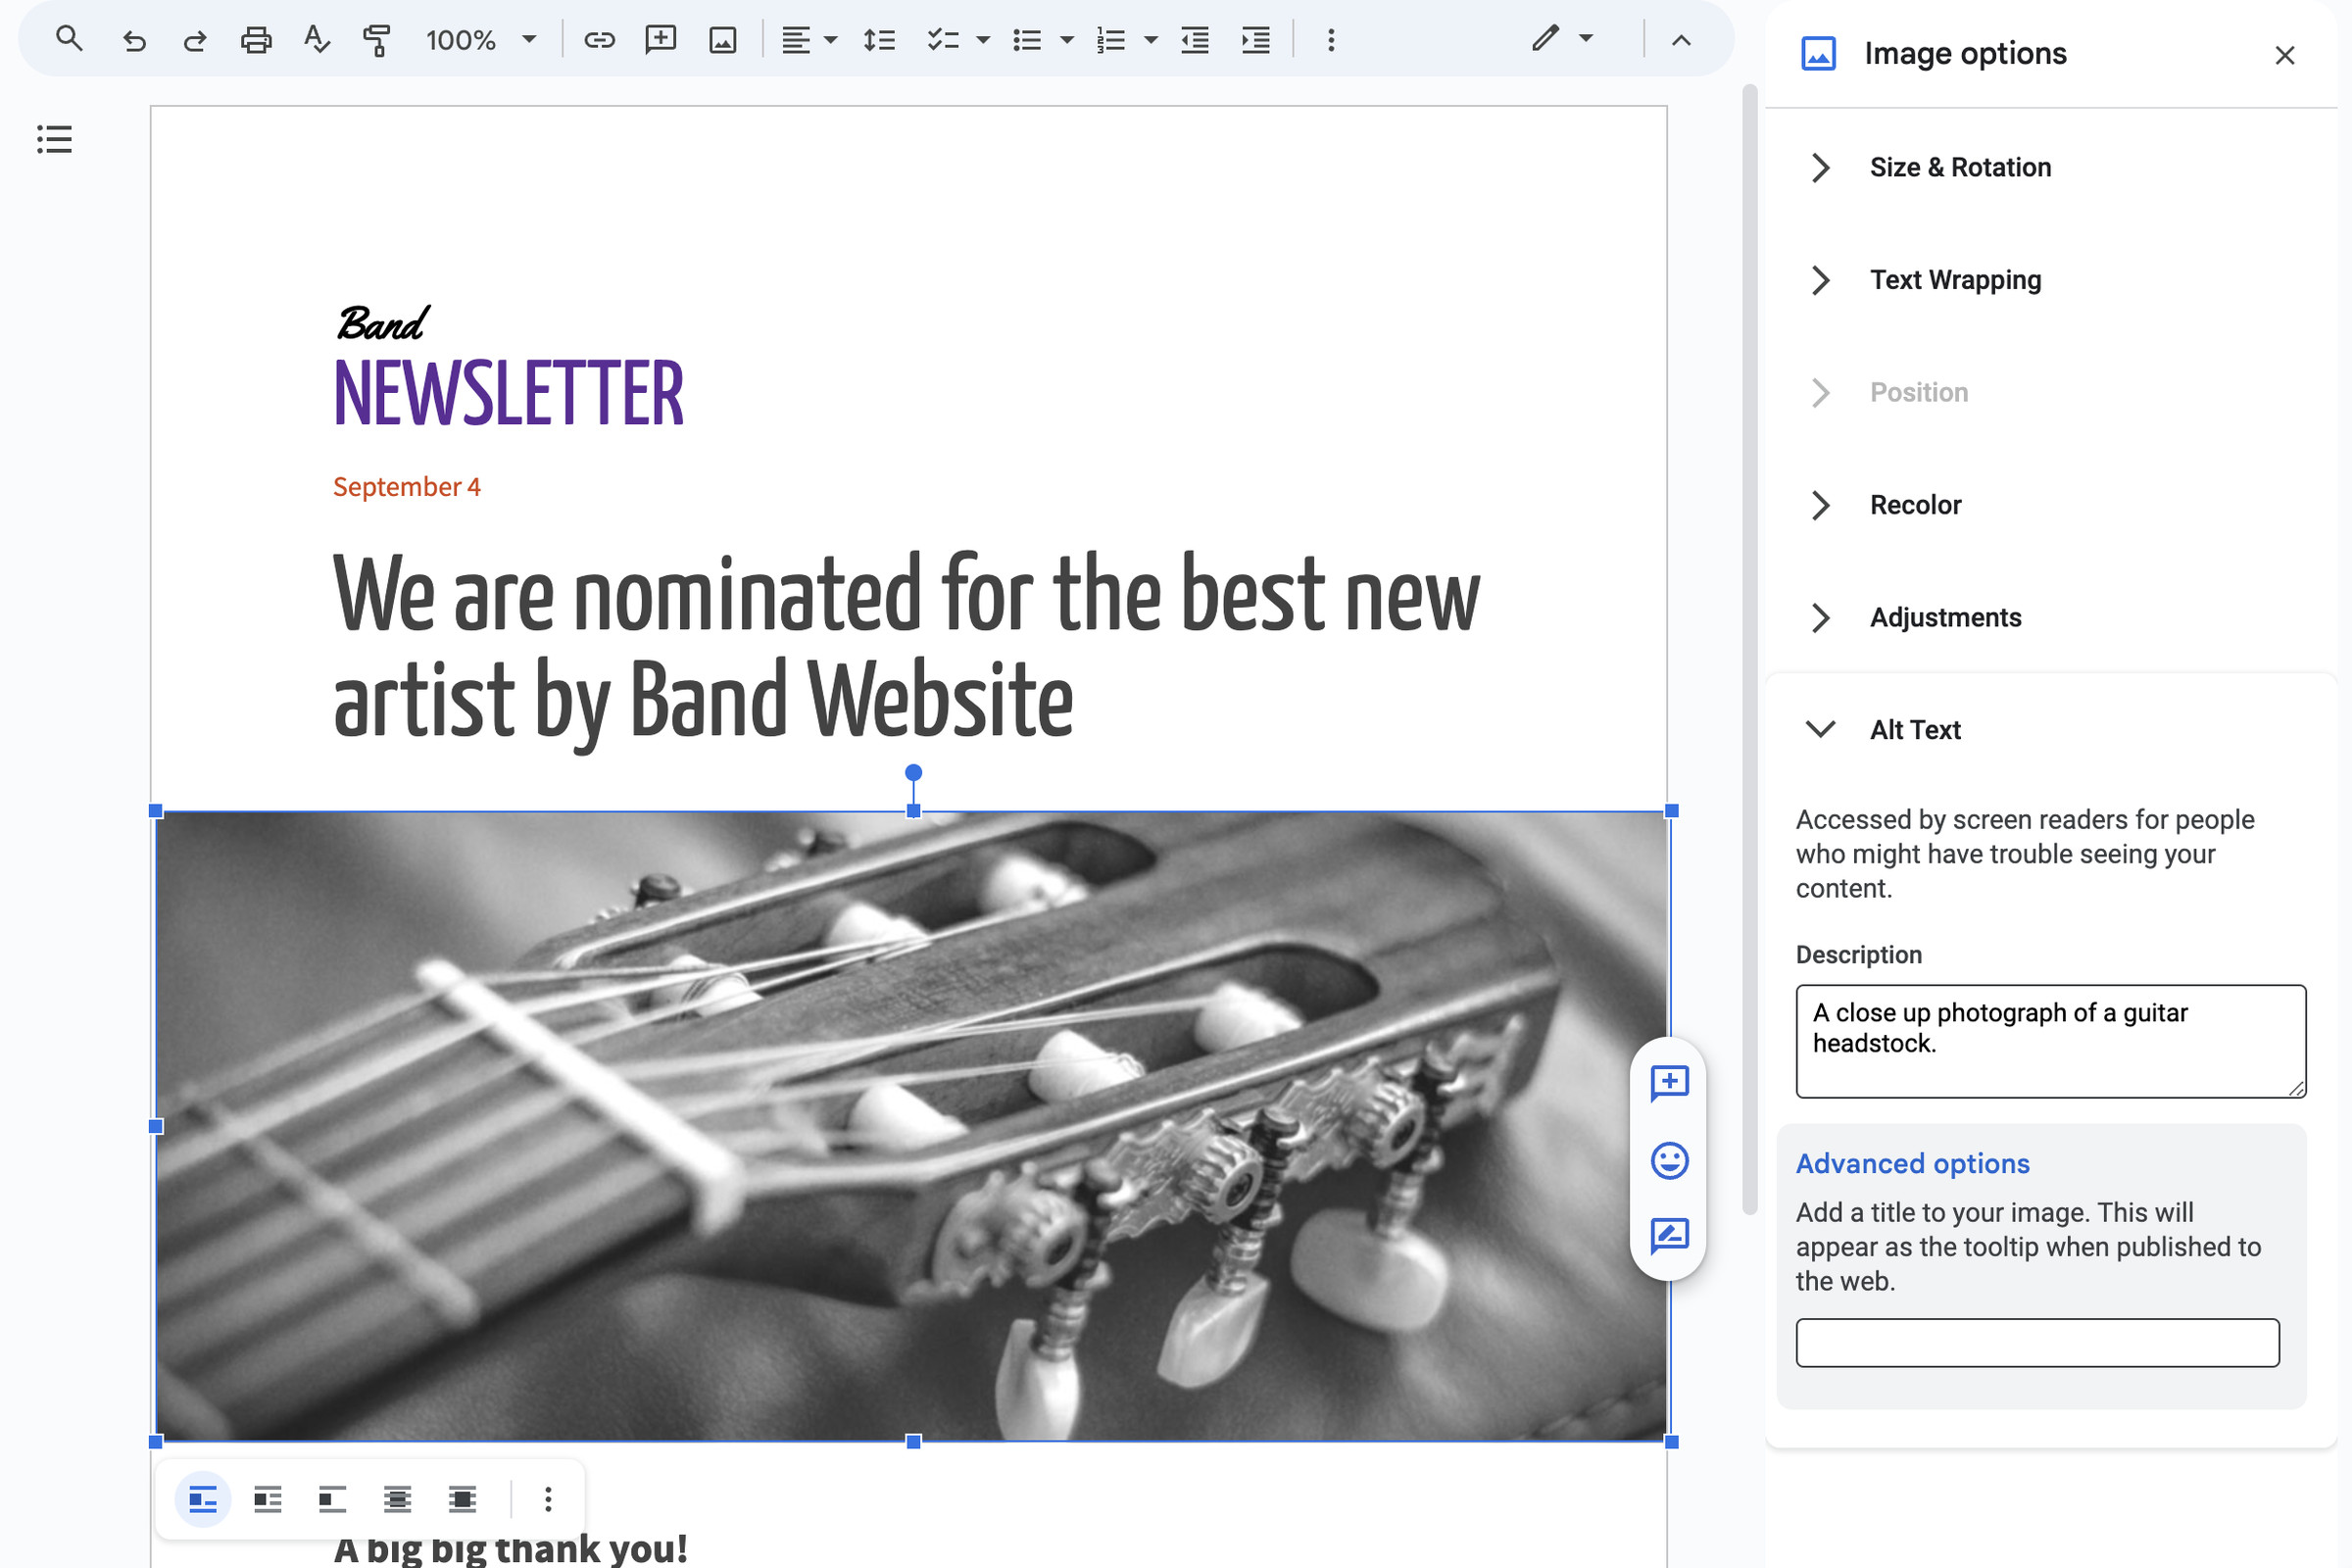 A screen shot sample of a Google Doc with an image of a guitar headstock. To the right, the “Image options” sidebar shows Alt Text as the fifth option, with a description of what alt text is for, and a box for entering details about the image.